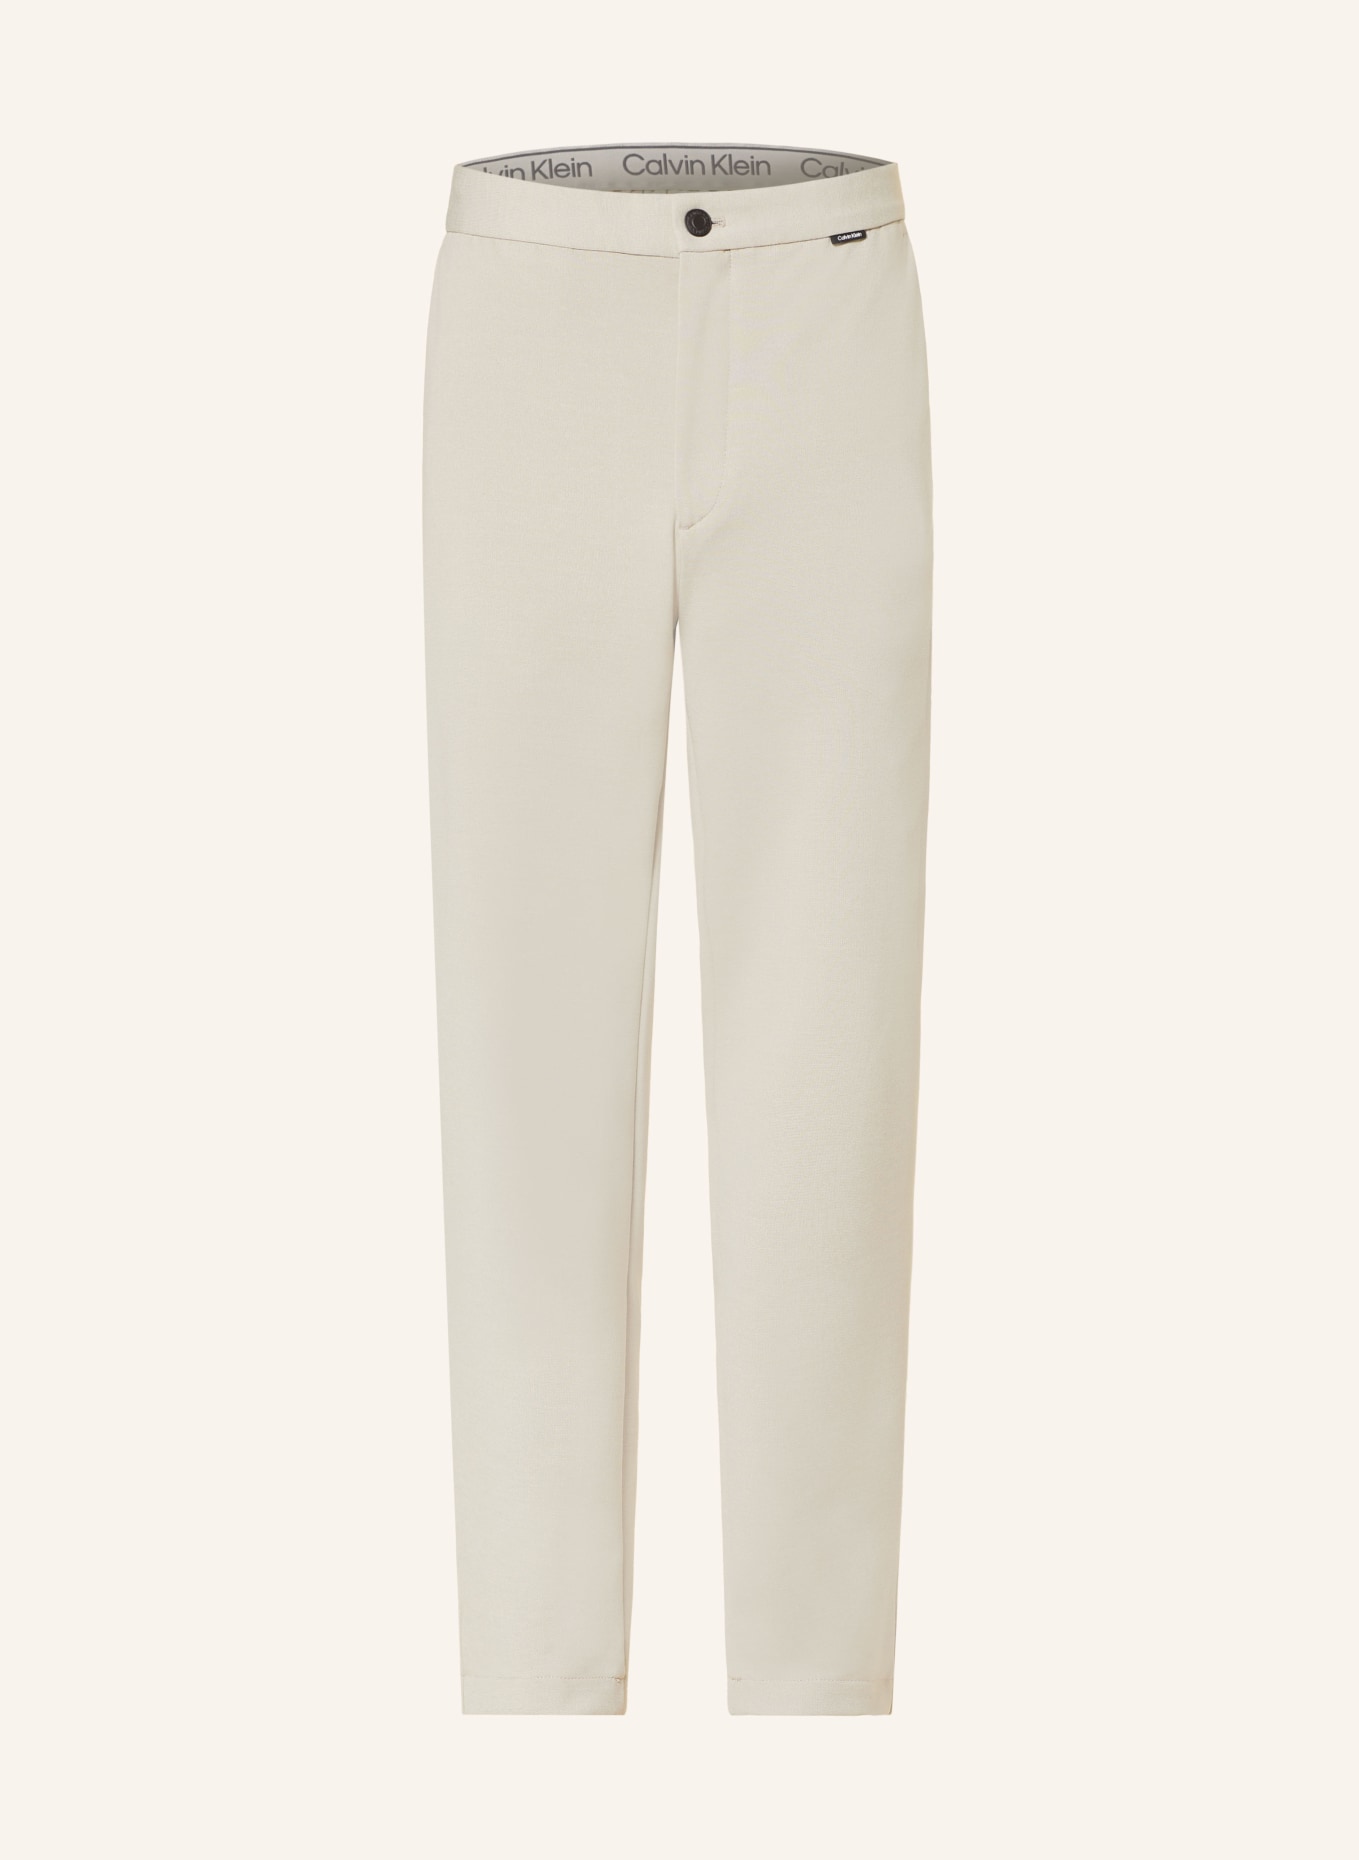 Calvin Klein Jersey pants tapered fit, Color: ACE Stony Beige (Image 1)